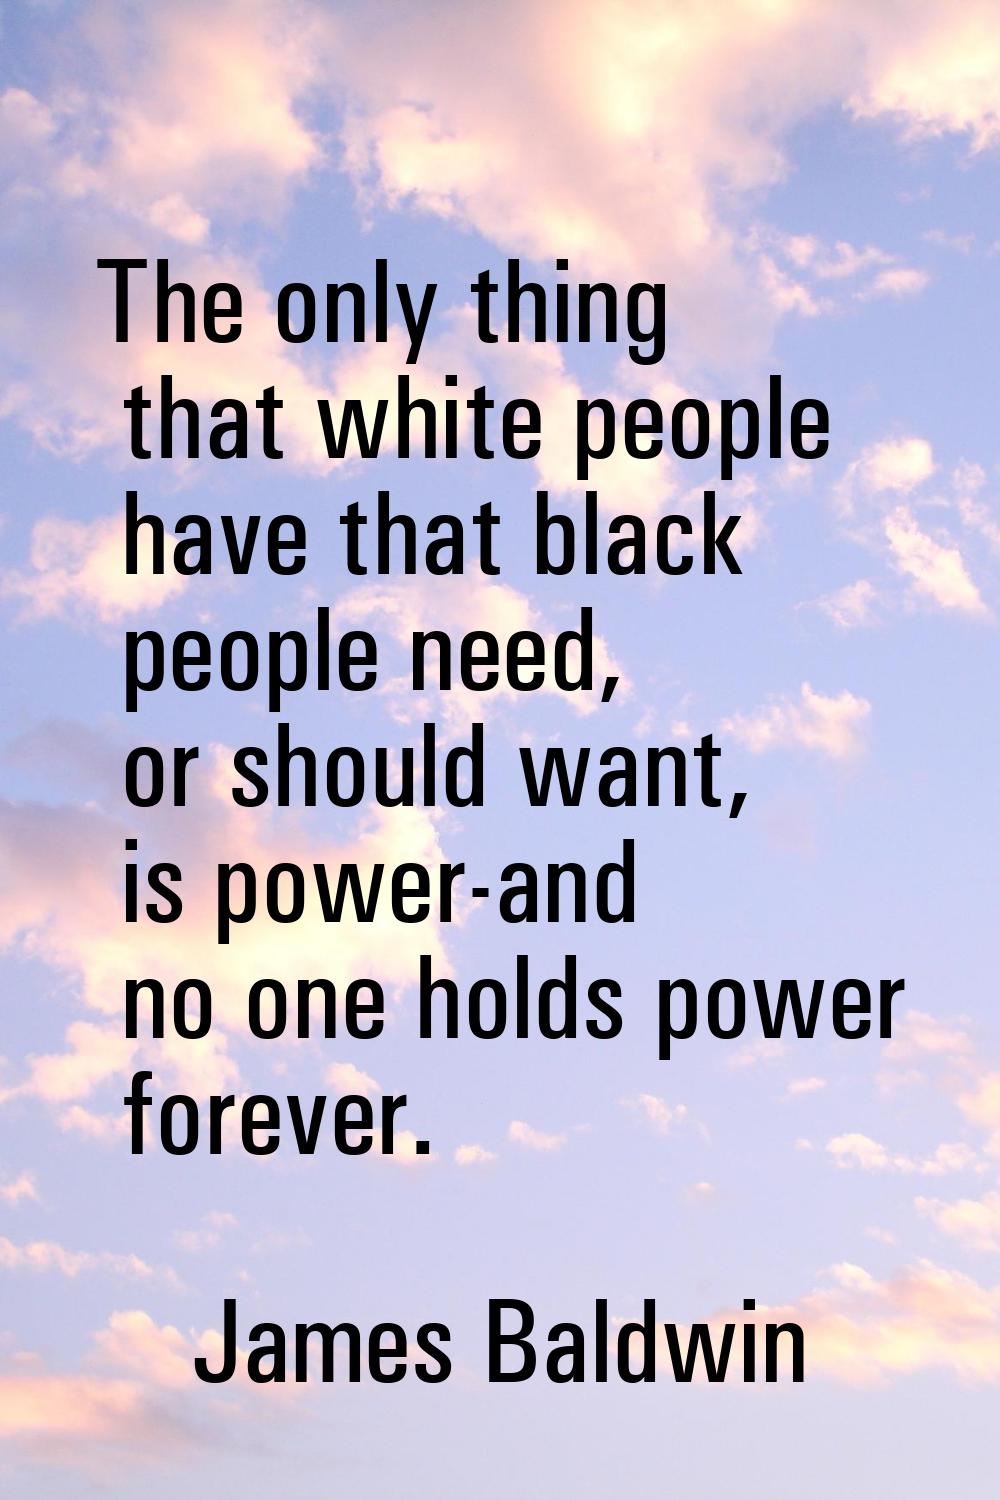 The only thing that white people have that black people need, or should want, is power-and no one h